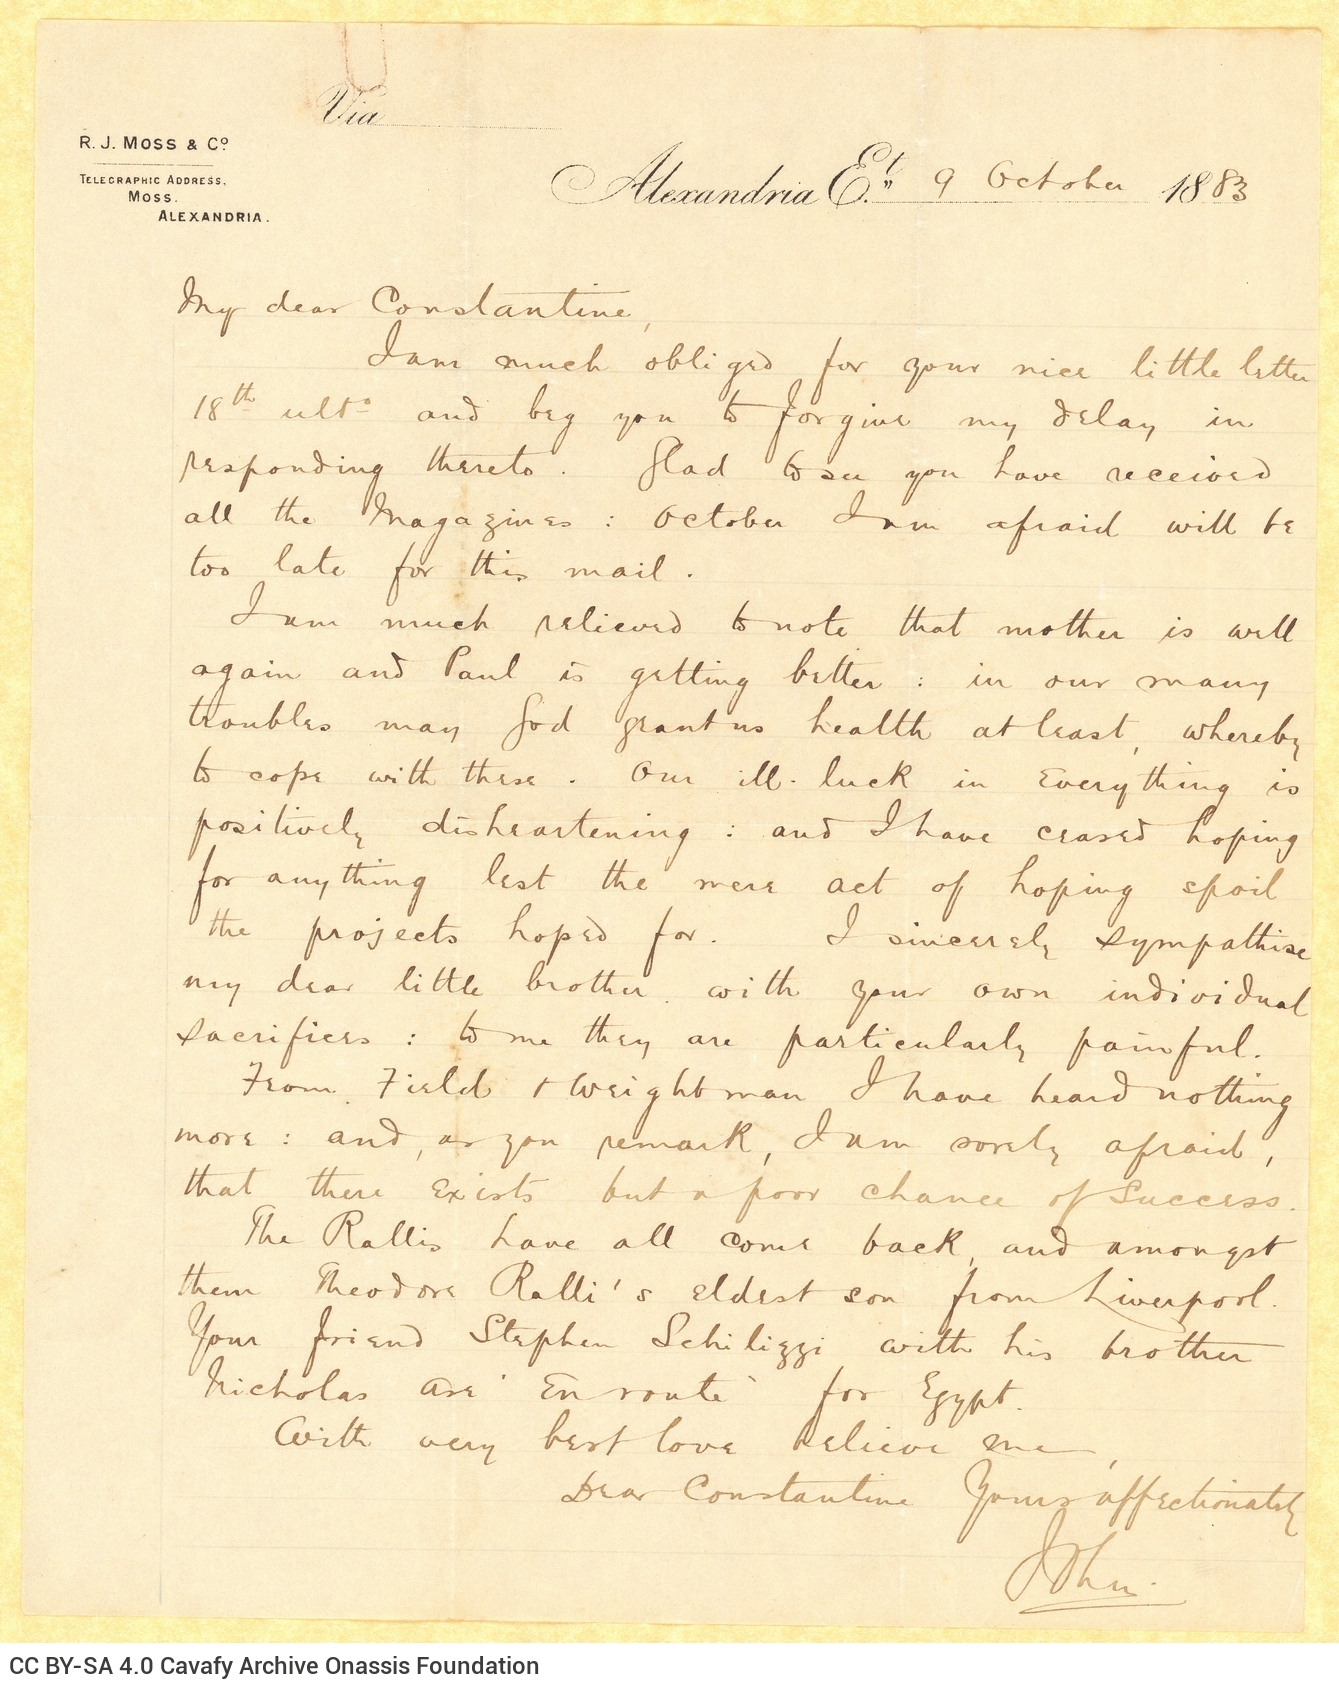 Handwritten letter by John Cavafy to C. P. Cavafy on the recto of a letterhead of R. J. Moss & Co., Alexandria. John refers t